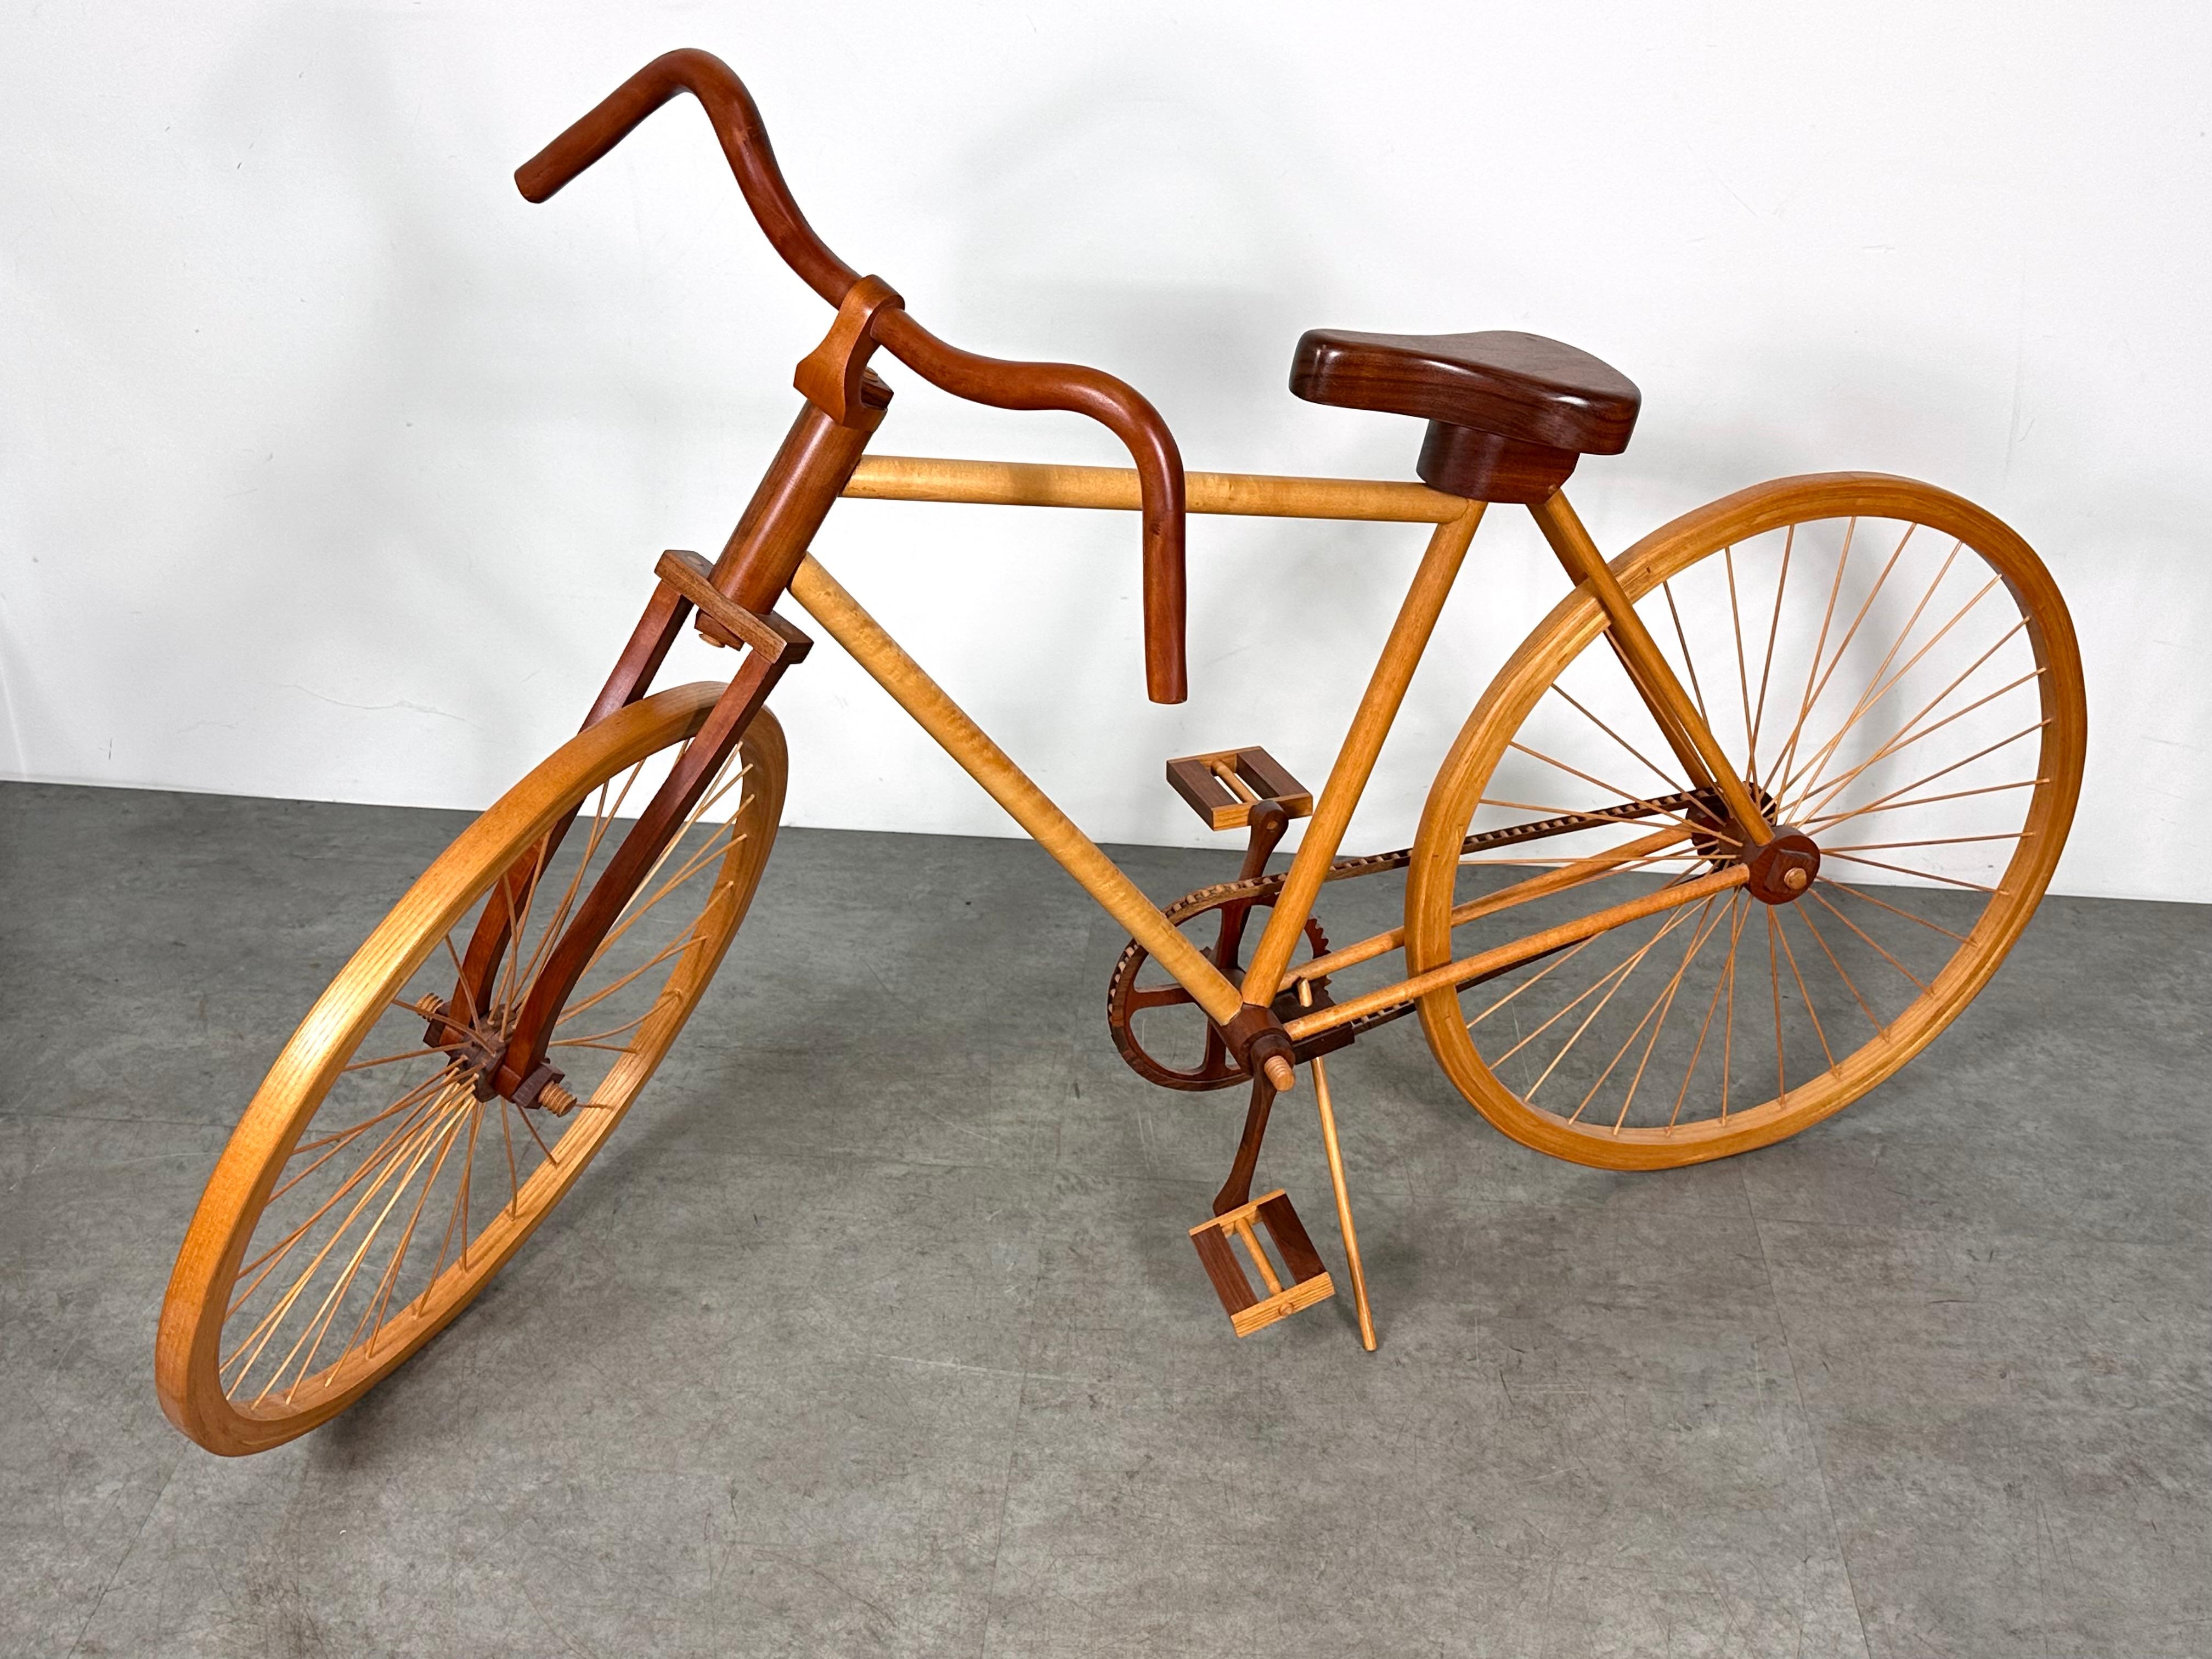 American Studio Craft Life Size Wooden Bicycle Sculpture Artist Signed 1988 For Sale 6